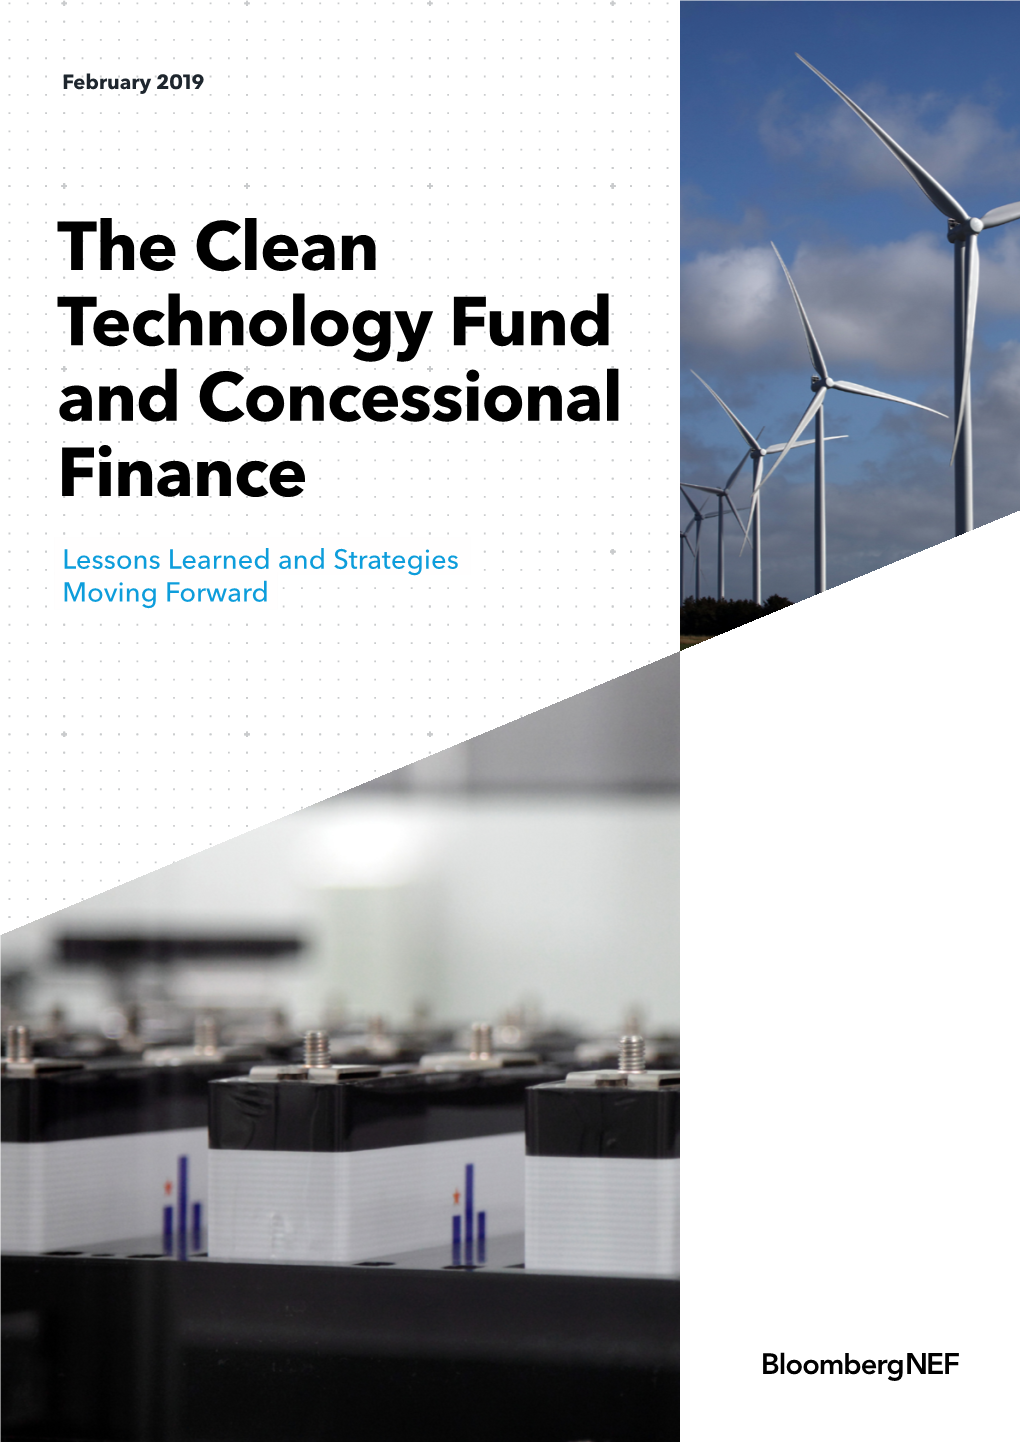 The Clean Technology Fund and Concessional Finance